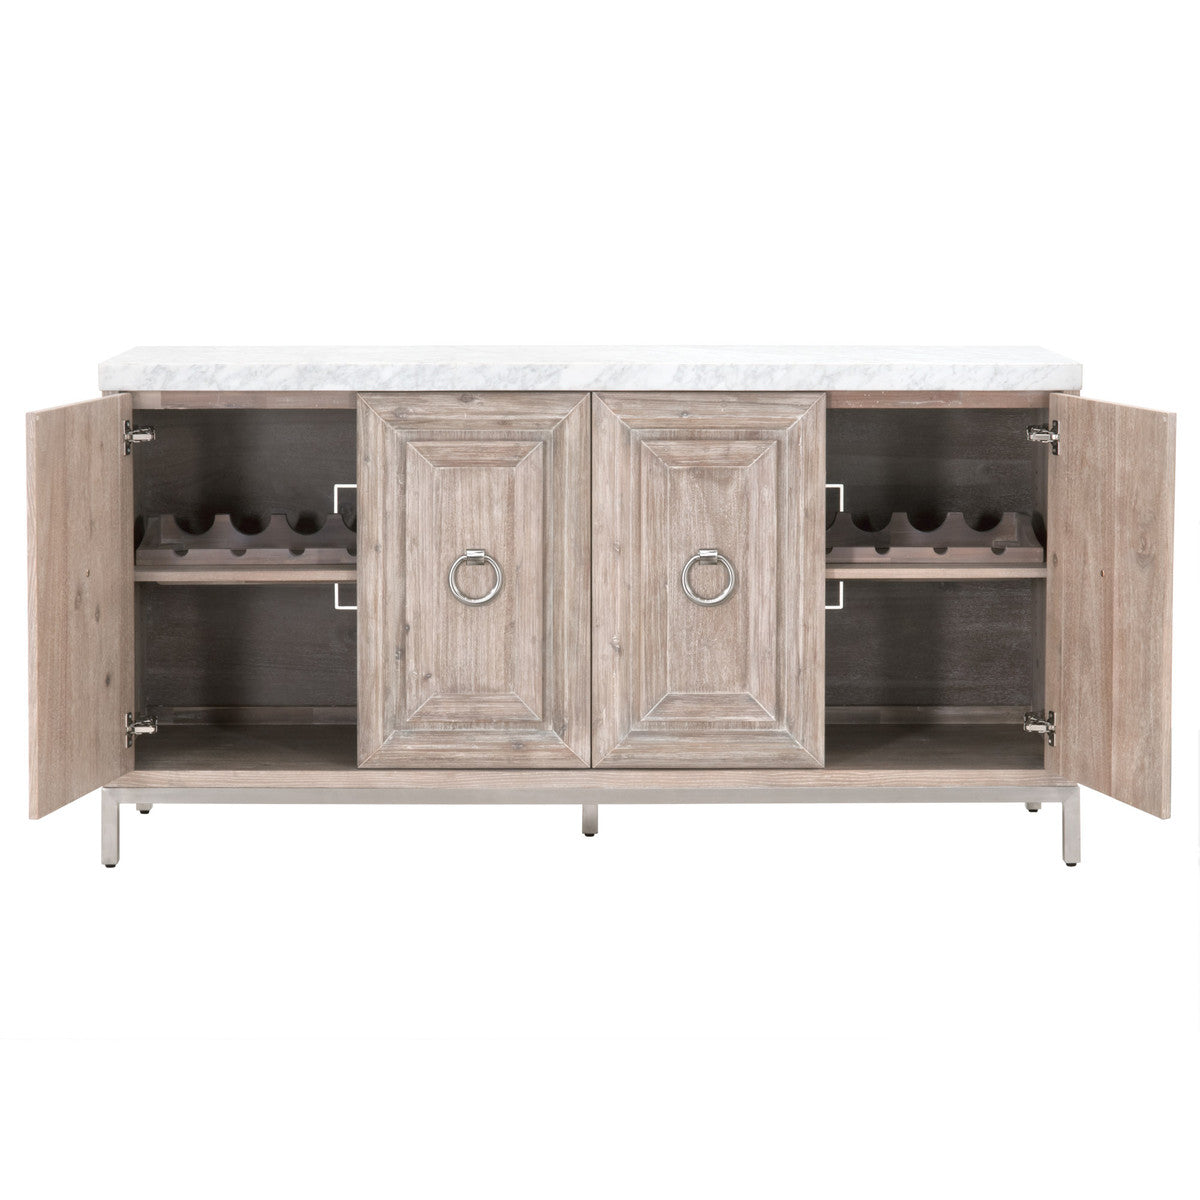 Azure Carrera Media Sideboard in White Carrera Marble, Natural Gray Acacia, Brushed Stainless Steel - 6087.NG-BSTL/WHT